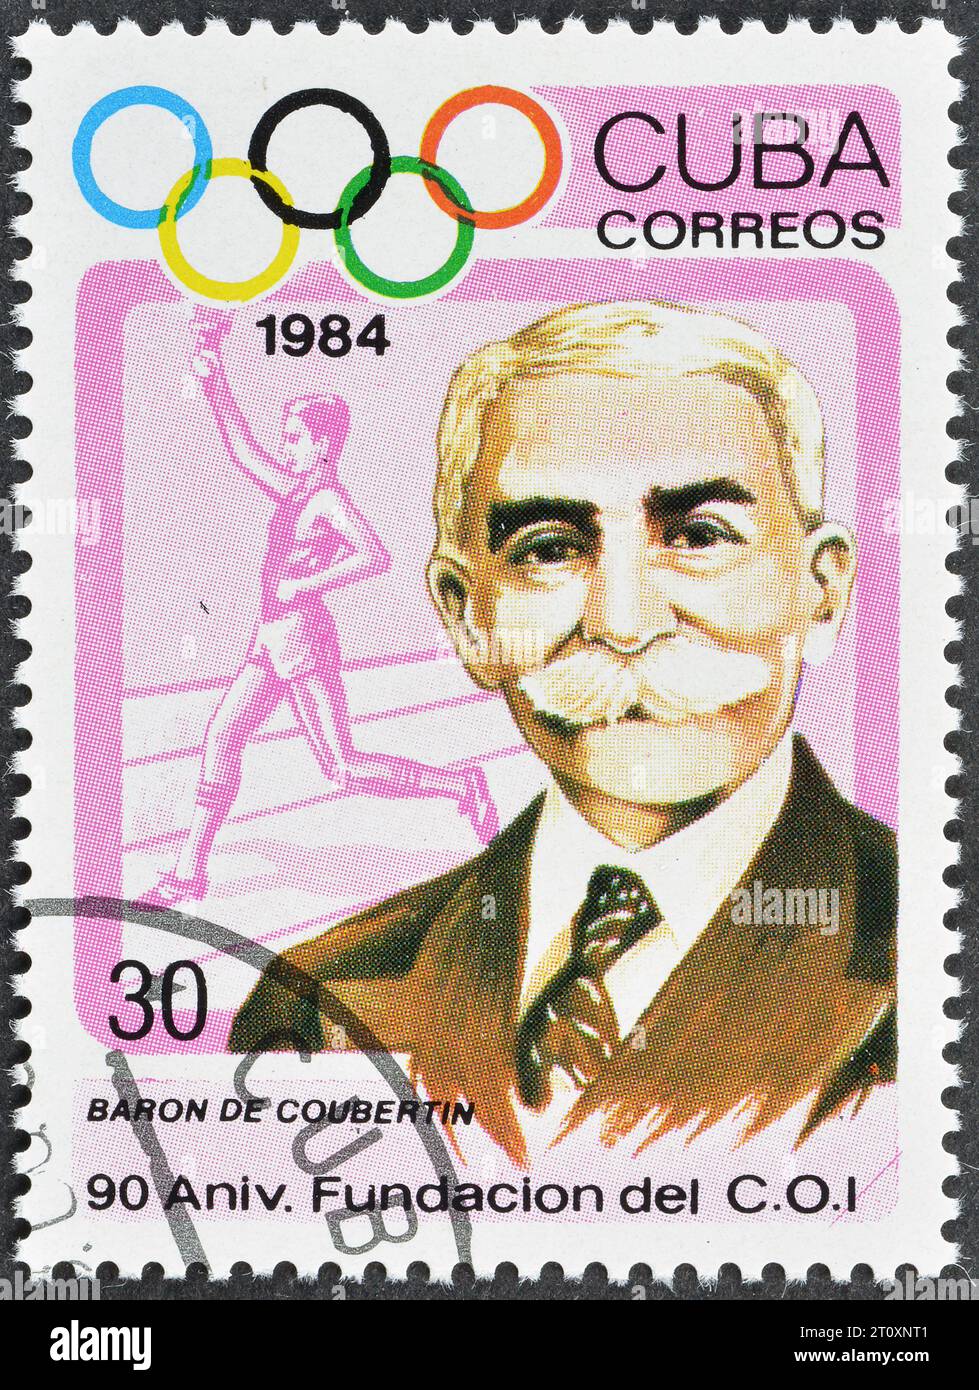 Cancelled postage stamp printed by Cuba, that celebrates 90th Anniversary of IOC. Pierre de Coubertin (1863-1937), circa 1984. Stock Photo